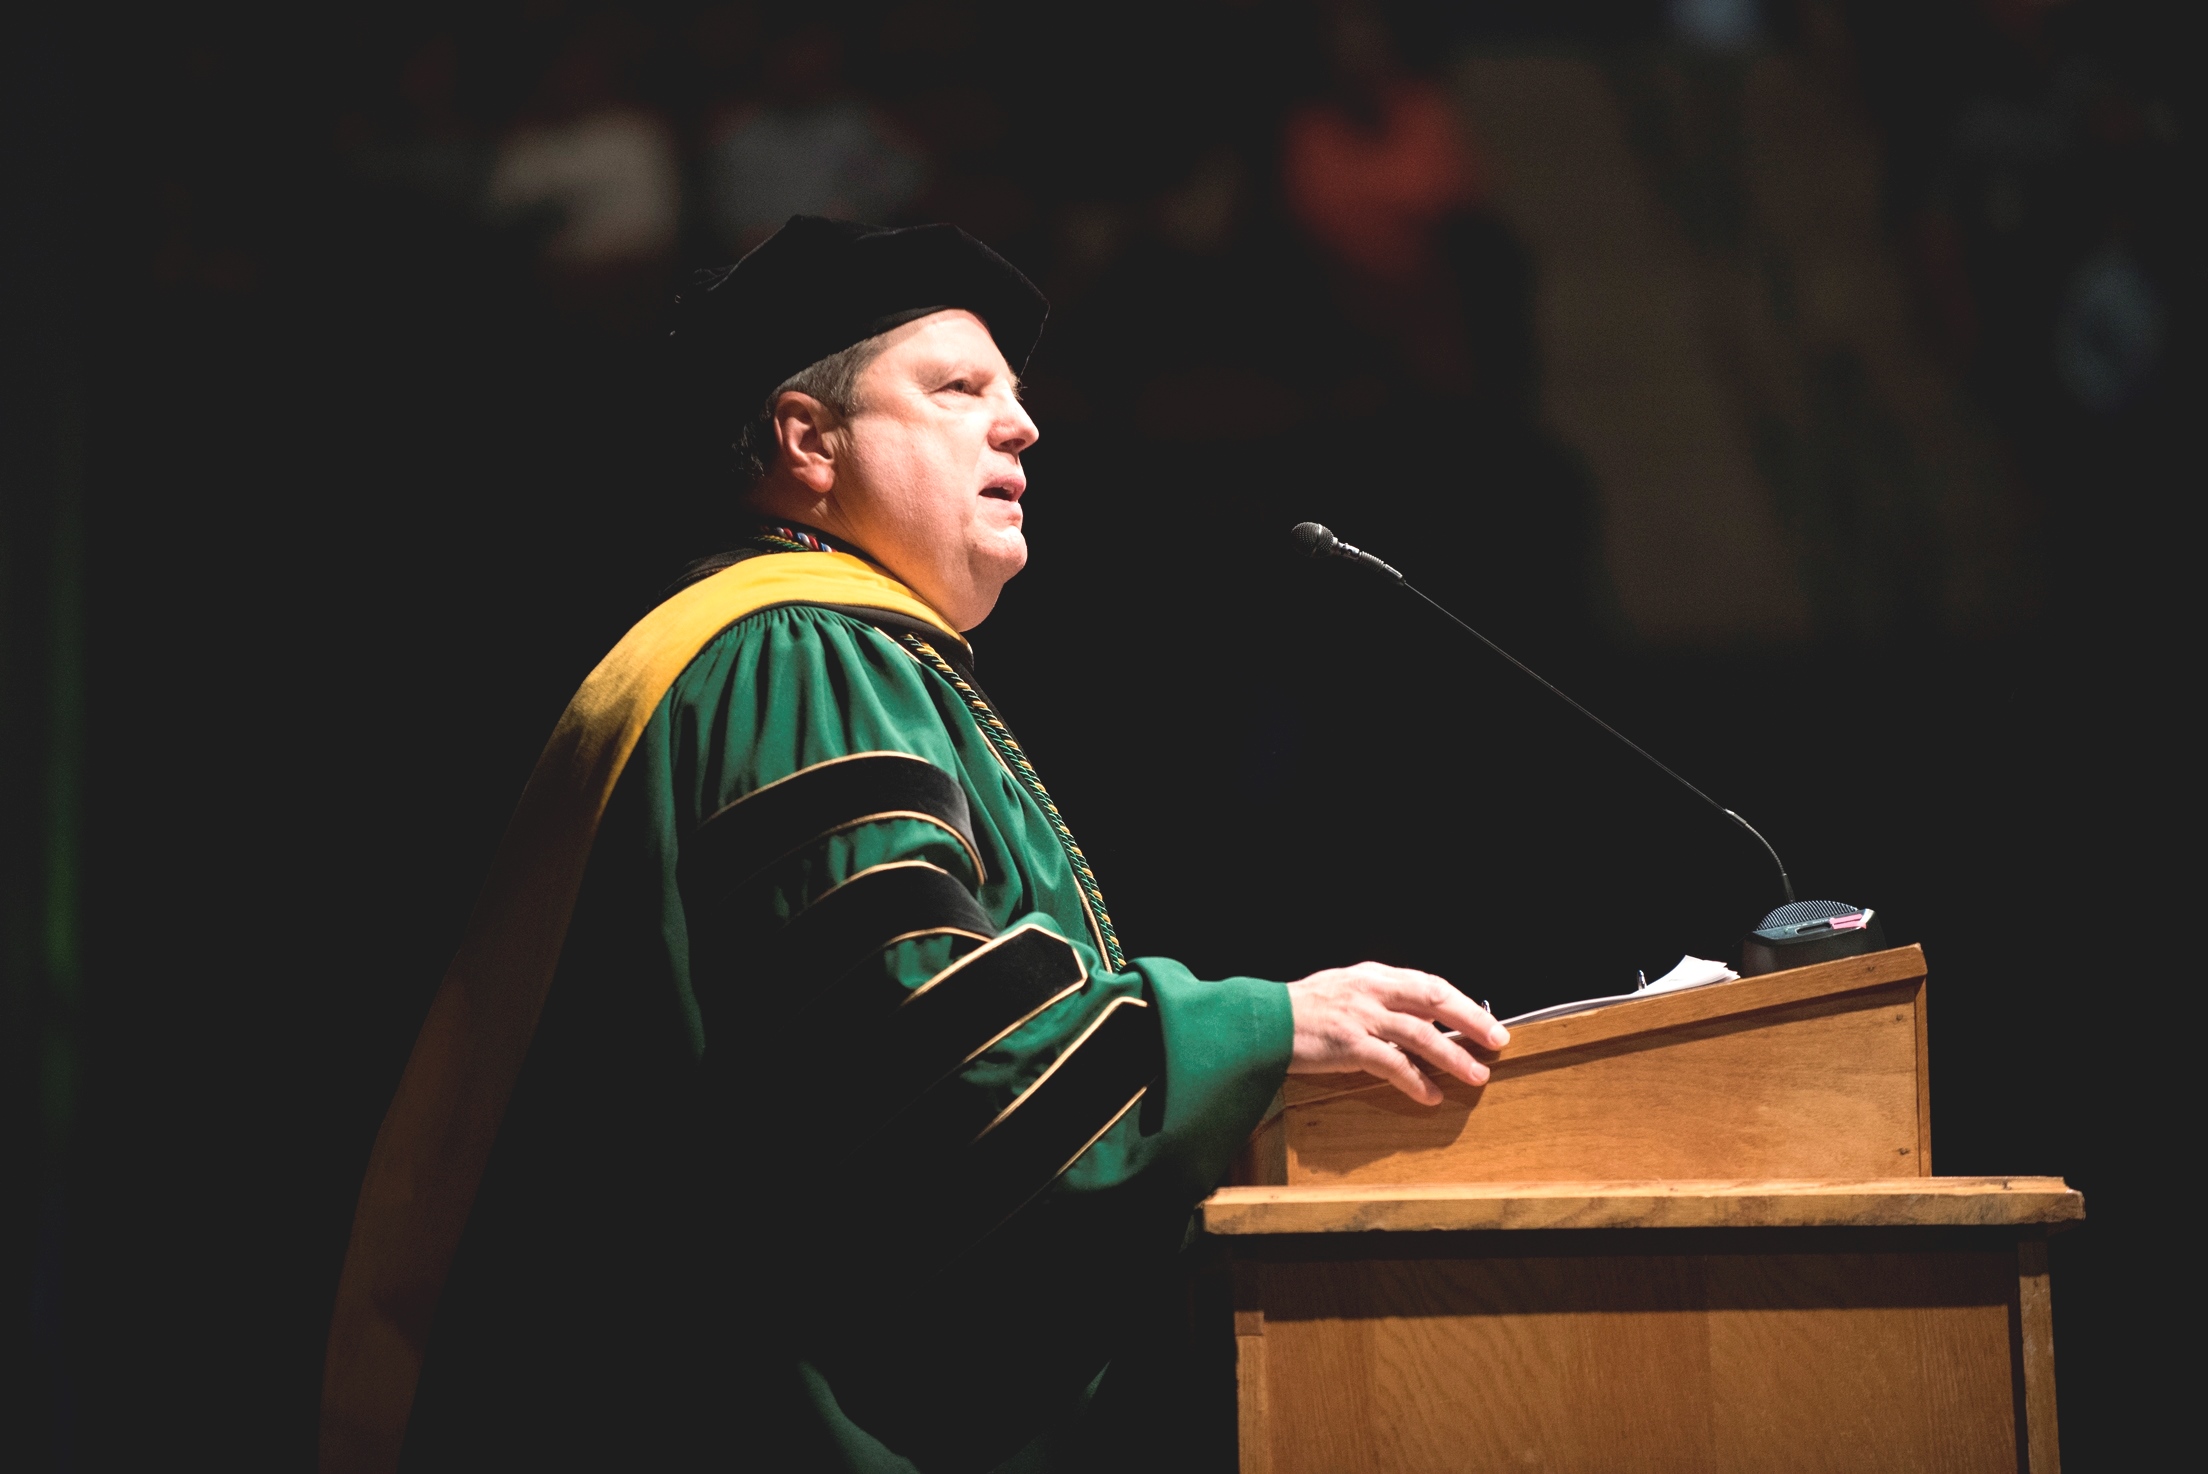 Dr. Robert A. Clark, president of Husson University, will be presiding over the 118th Annual Commencement Exercises at the Cross Insurance Center on May 6, 2017.